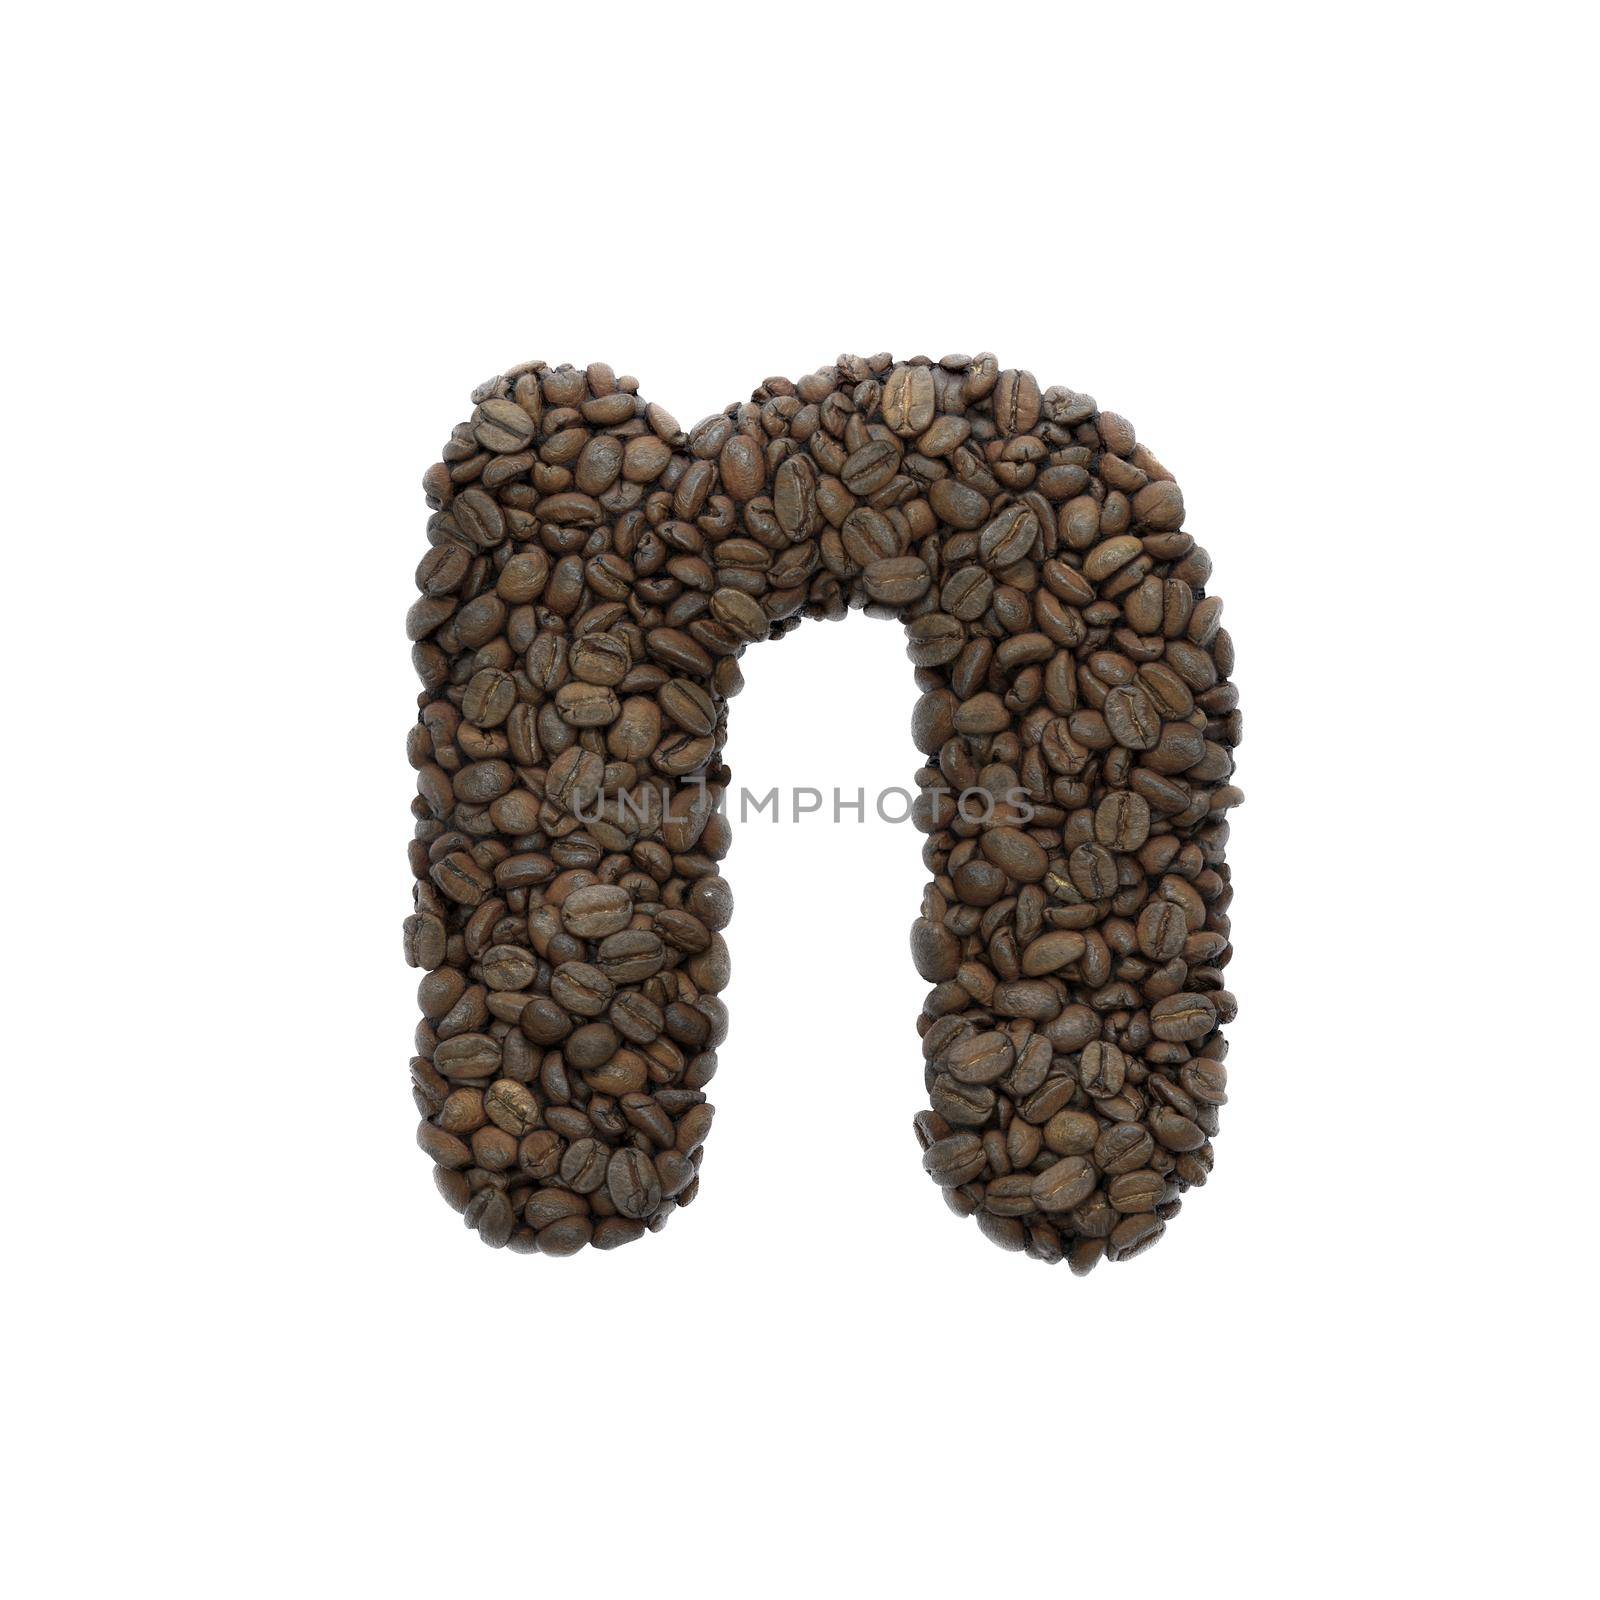 Coffee letter N - Small 3d roasted beans font - Suitable for Coffee, energy or insomnia related subjects by chrisroll